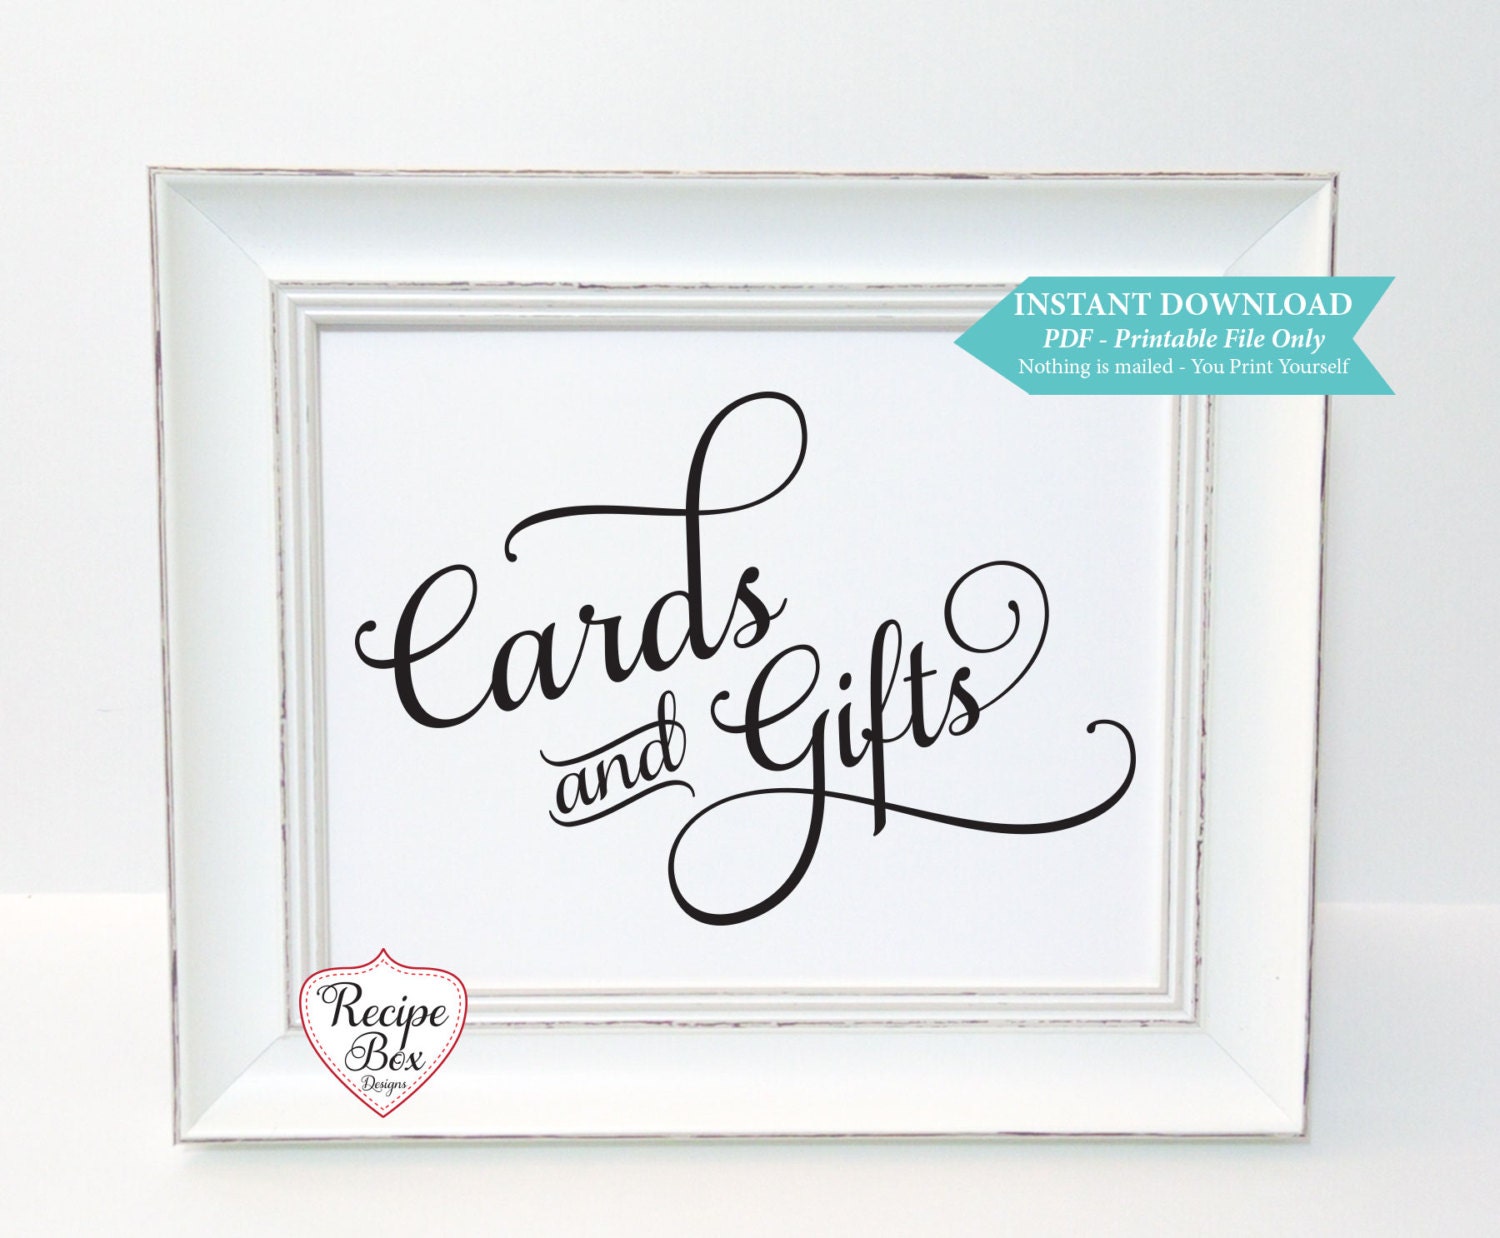 Cards and Gifts Wedding Printable Sign Card Table Sign